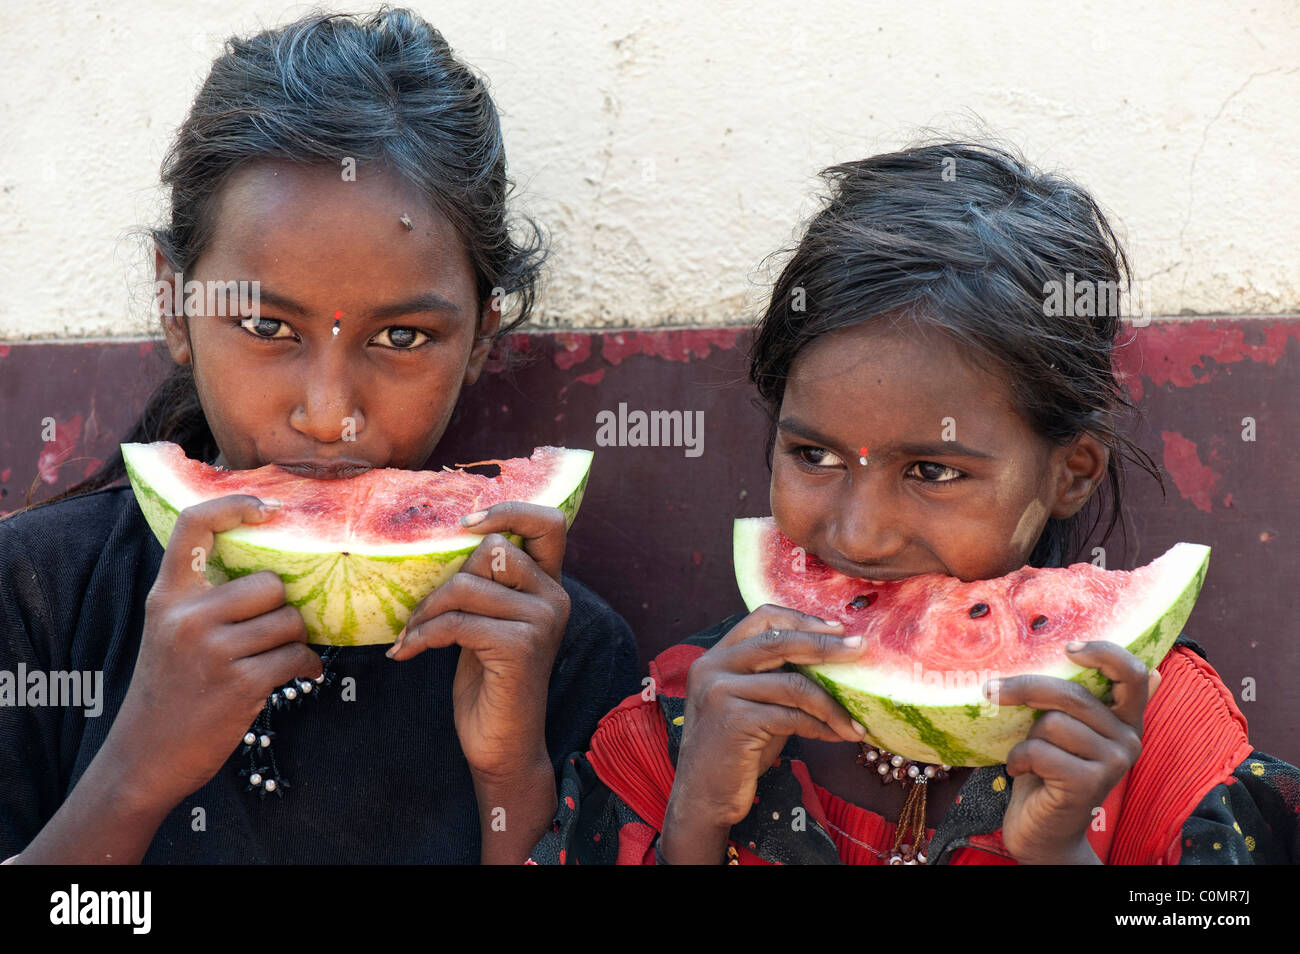 Happy young poor lower caste Indian street girls (sisters) eating a slice of watermelon. Andhra Pradesh, India Stock Photo